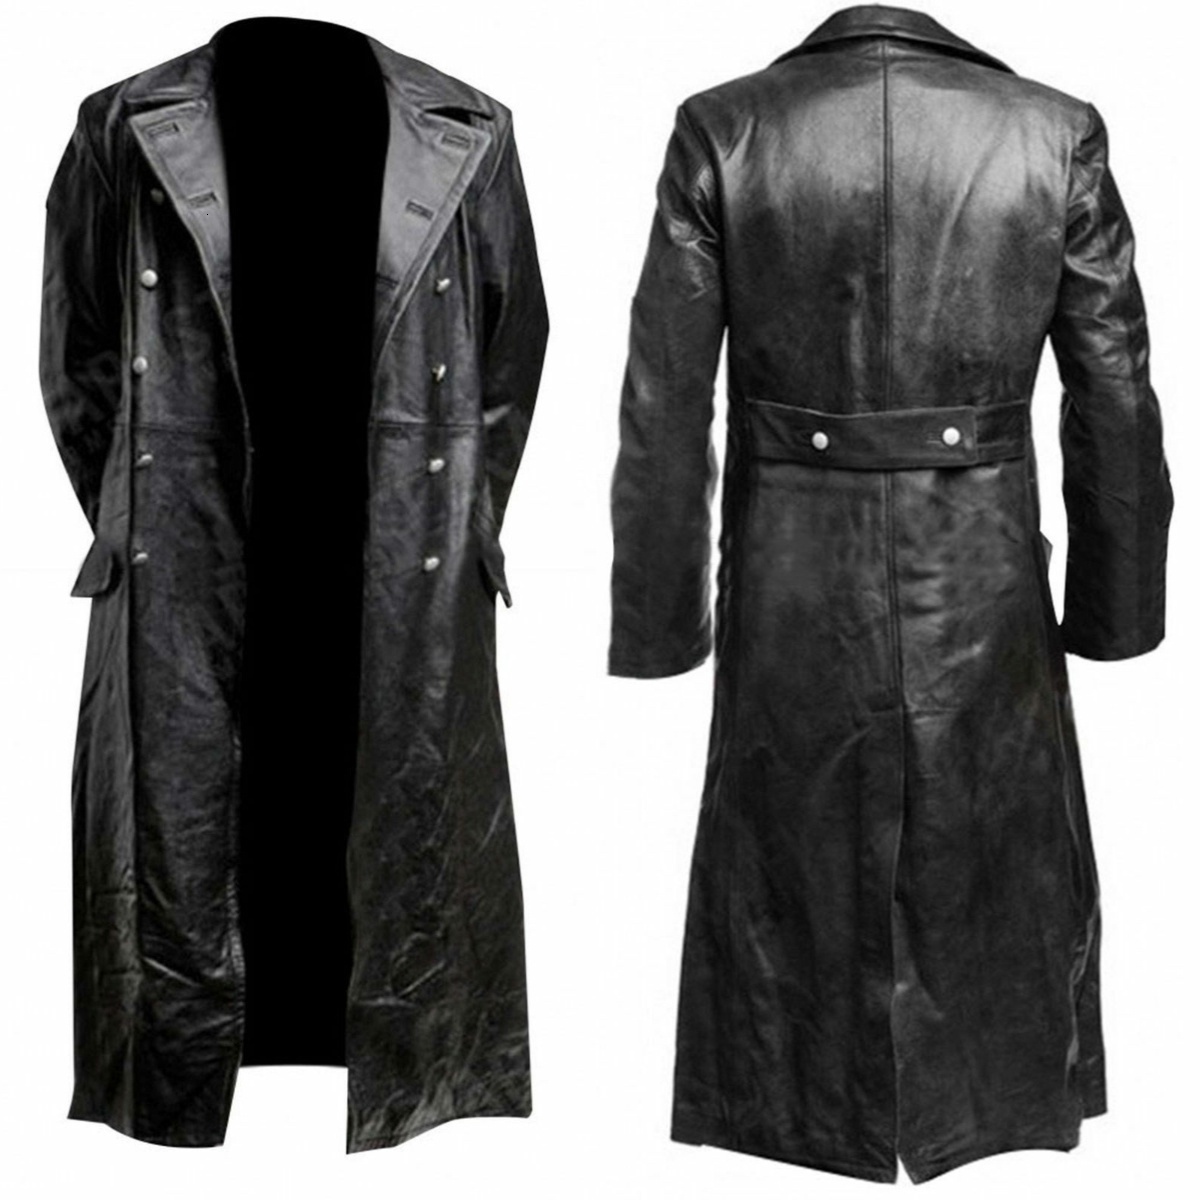 

Men's Leather Faux MEN'S GERMAN CLASSIC WW2 MILITARY UNIFORM OFFICER BLACK REAL LEATHER TRENCH COAT 221124, Red